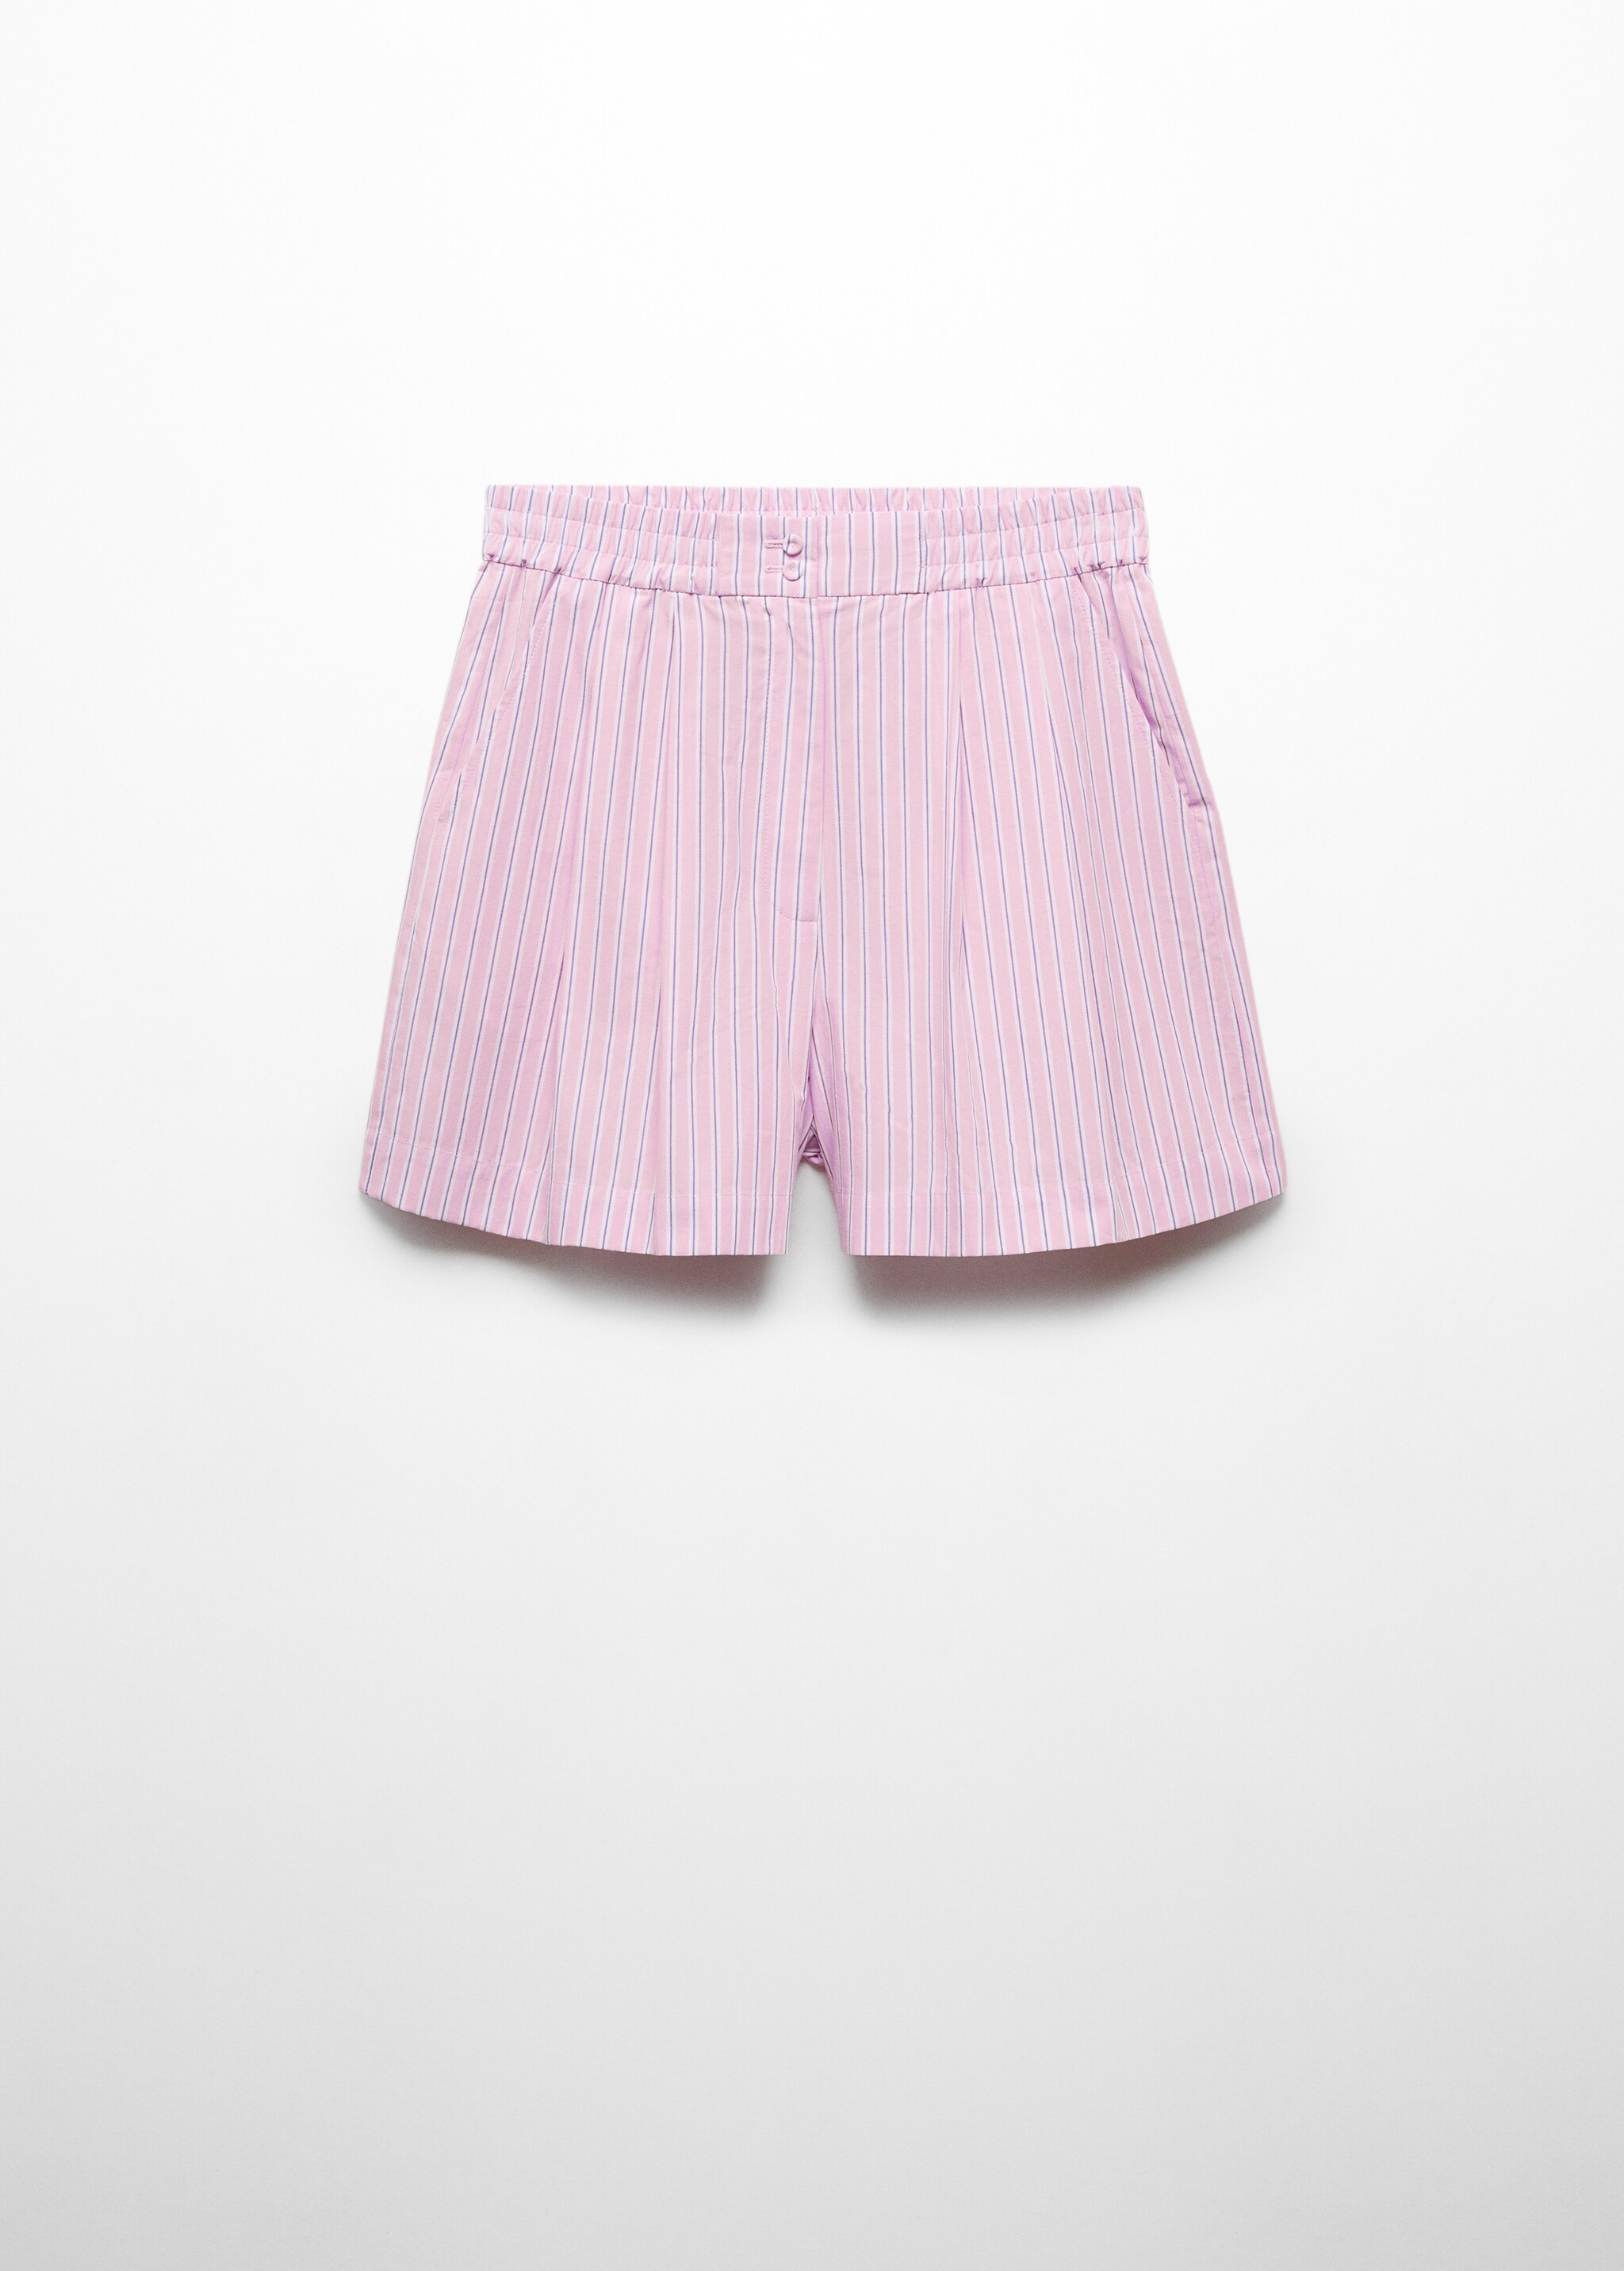 Striped cotton shorts - Article without model